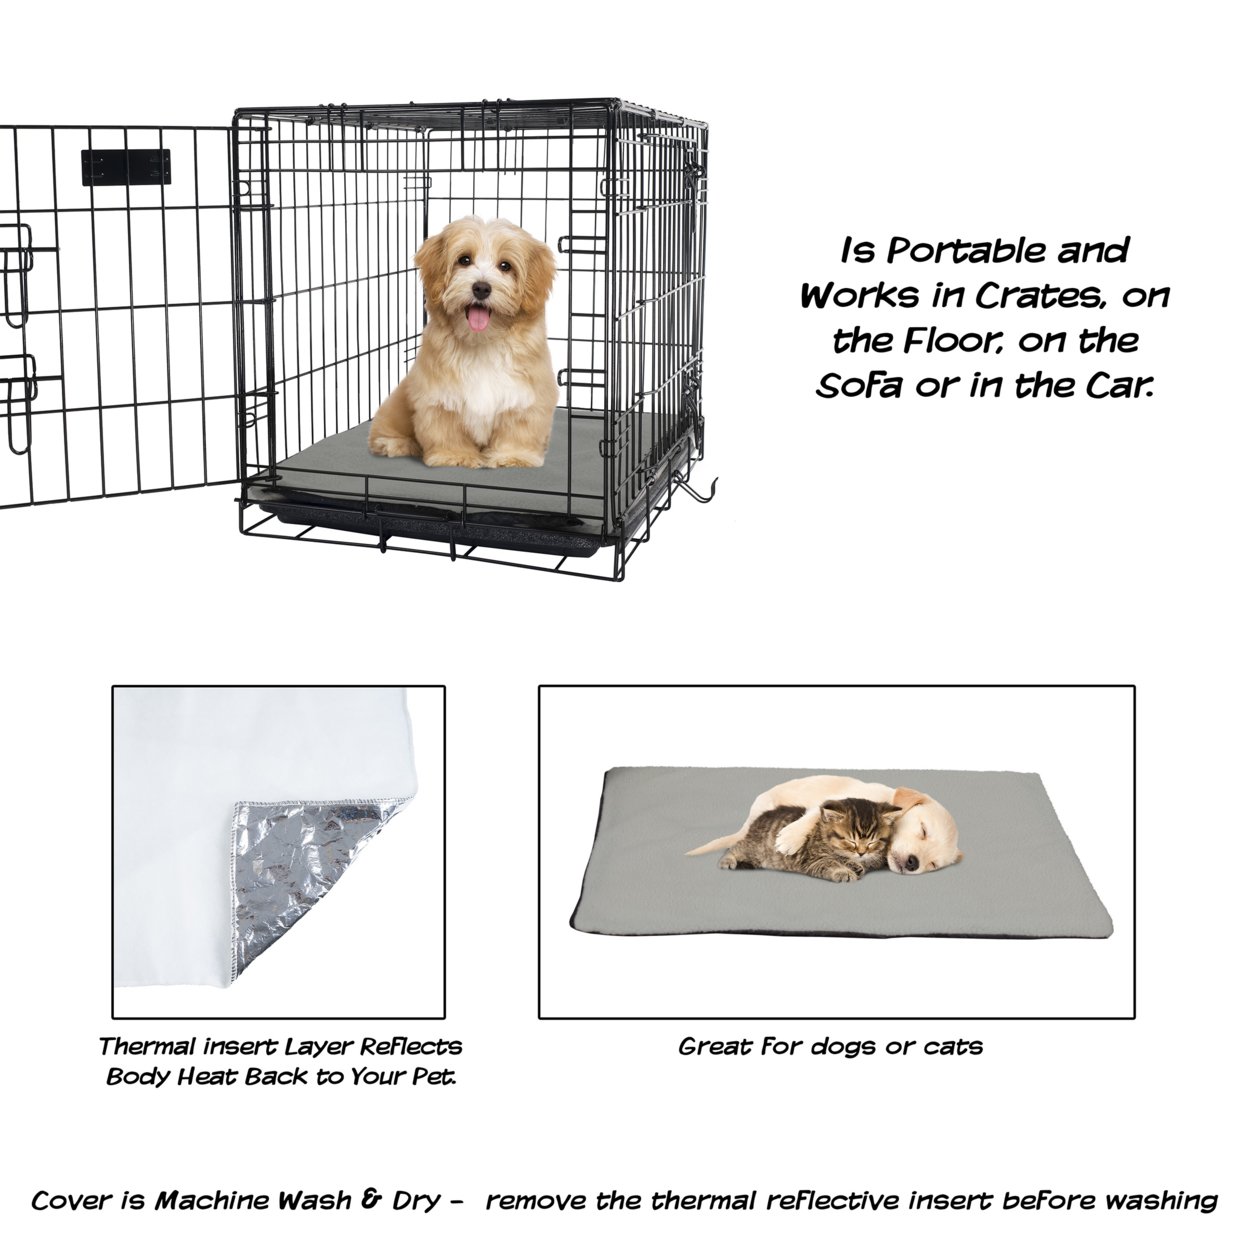 Self Warming Pet Crate Pad- Self Heating Thermal Bed Liner For Dogs, Cats, Pets 36 X 24